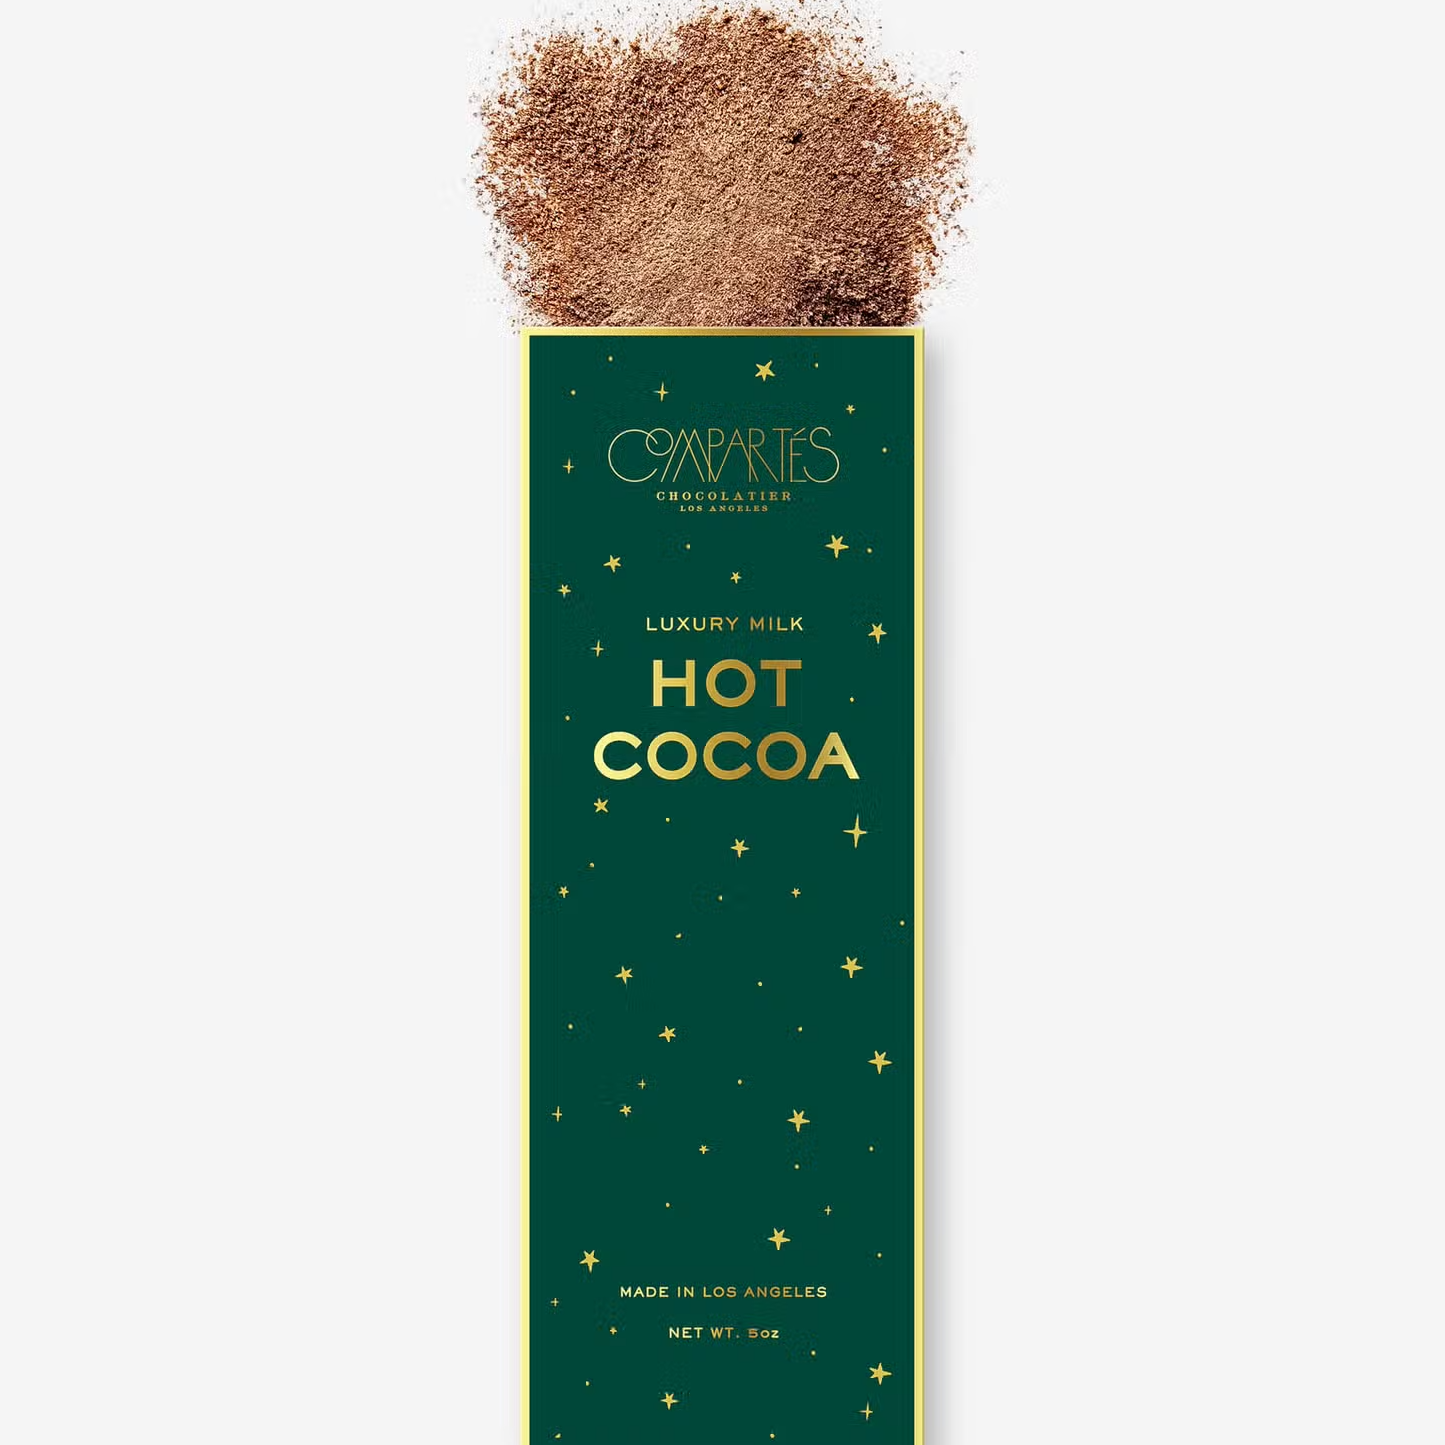 Emerald green box with gold accents on the front. Box reads &quot;Luxury Hot Cocoa&quot; with Compartes logo near the top in the center. Hot cocoa powder displayed on top of the box